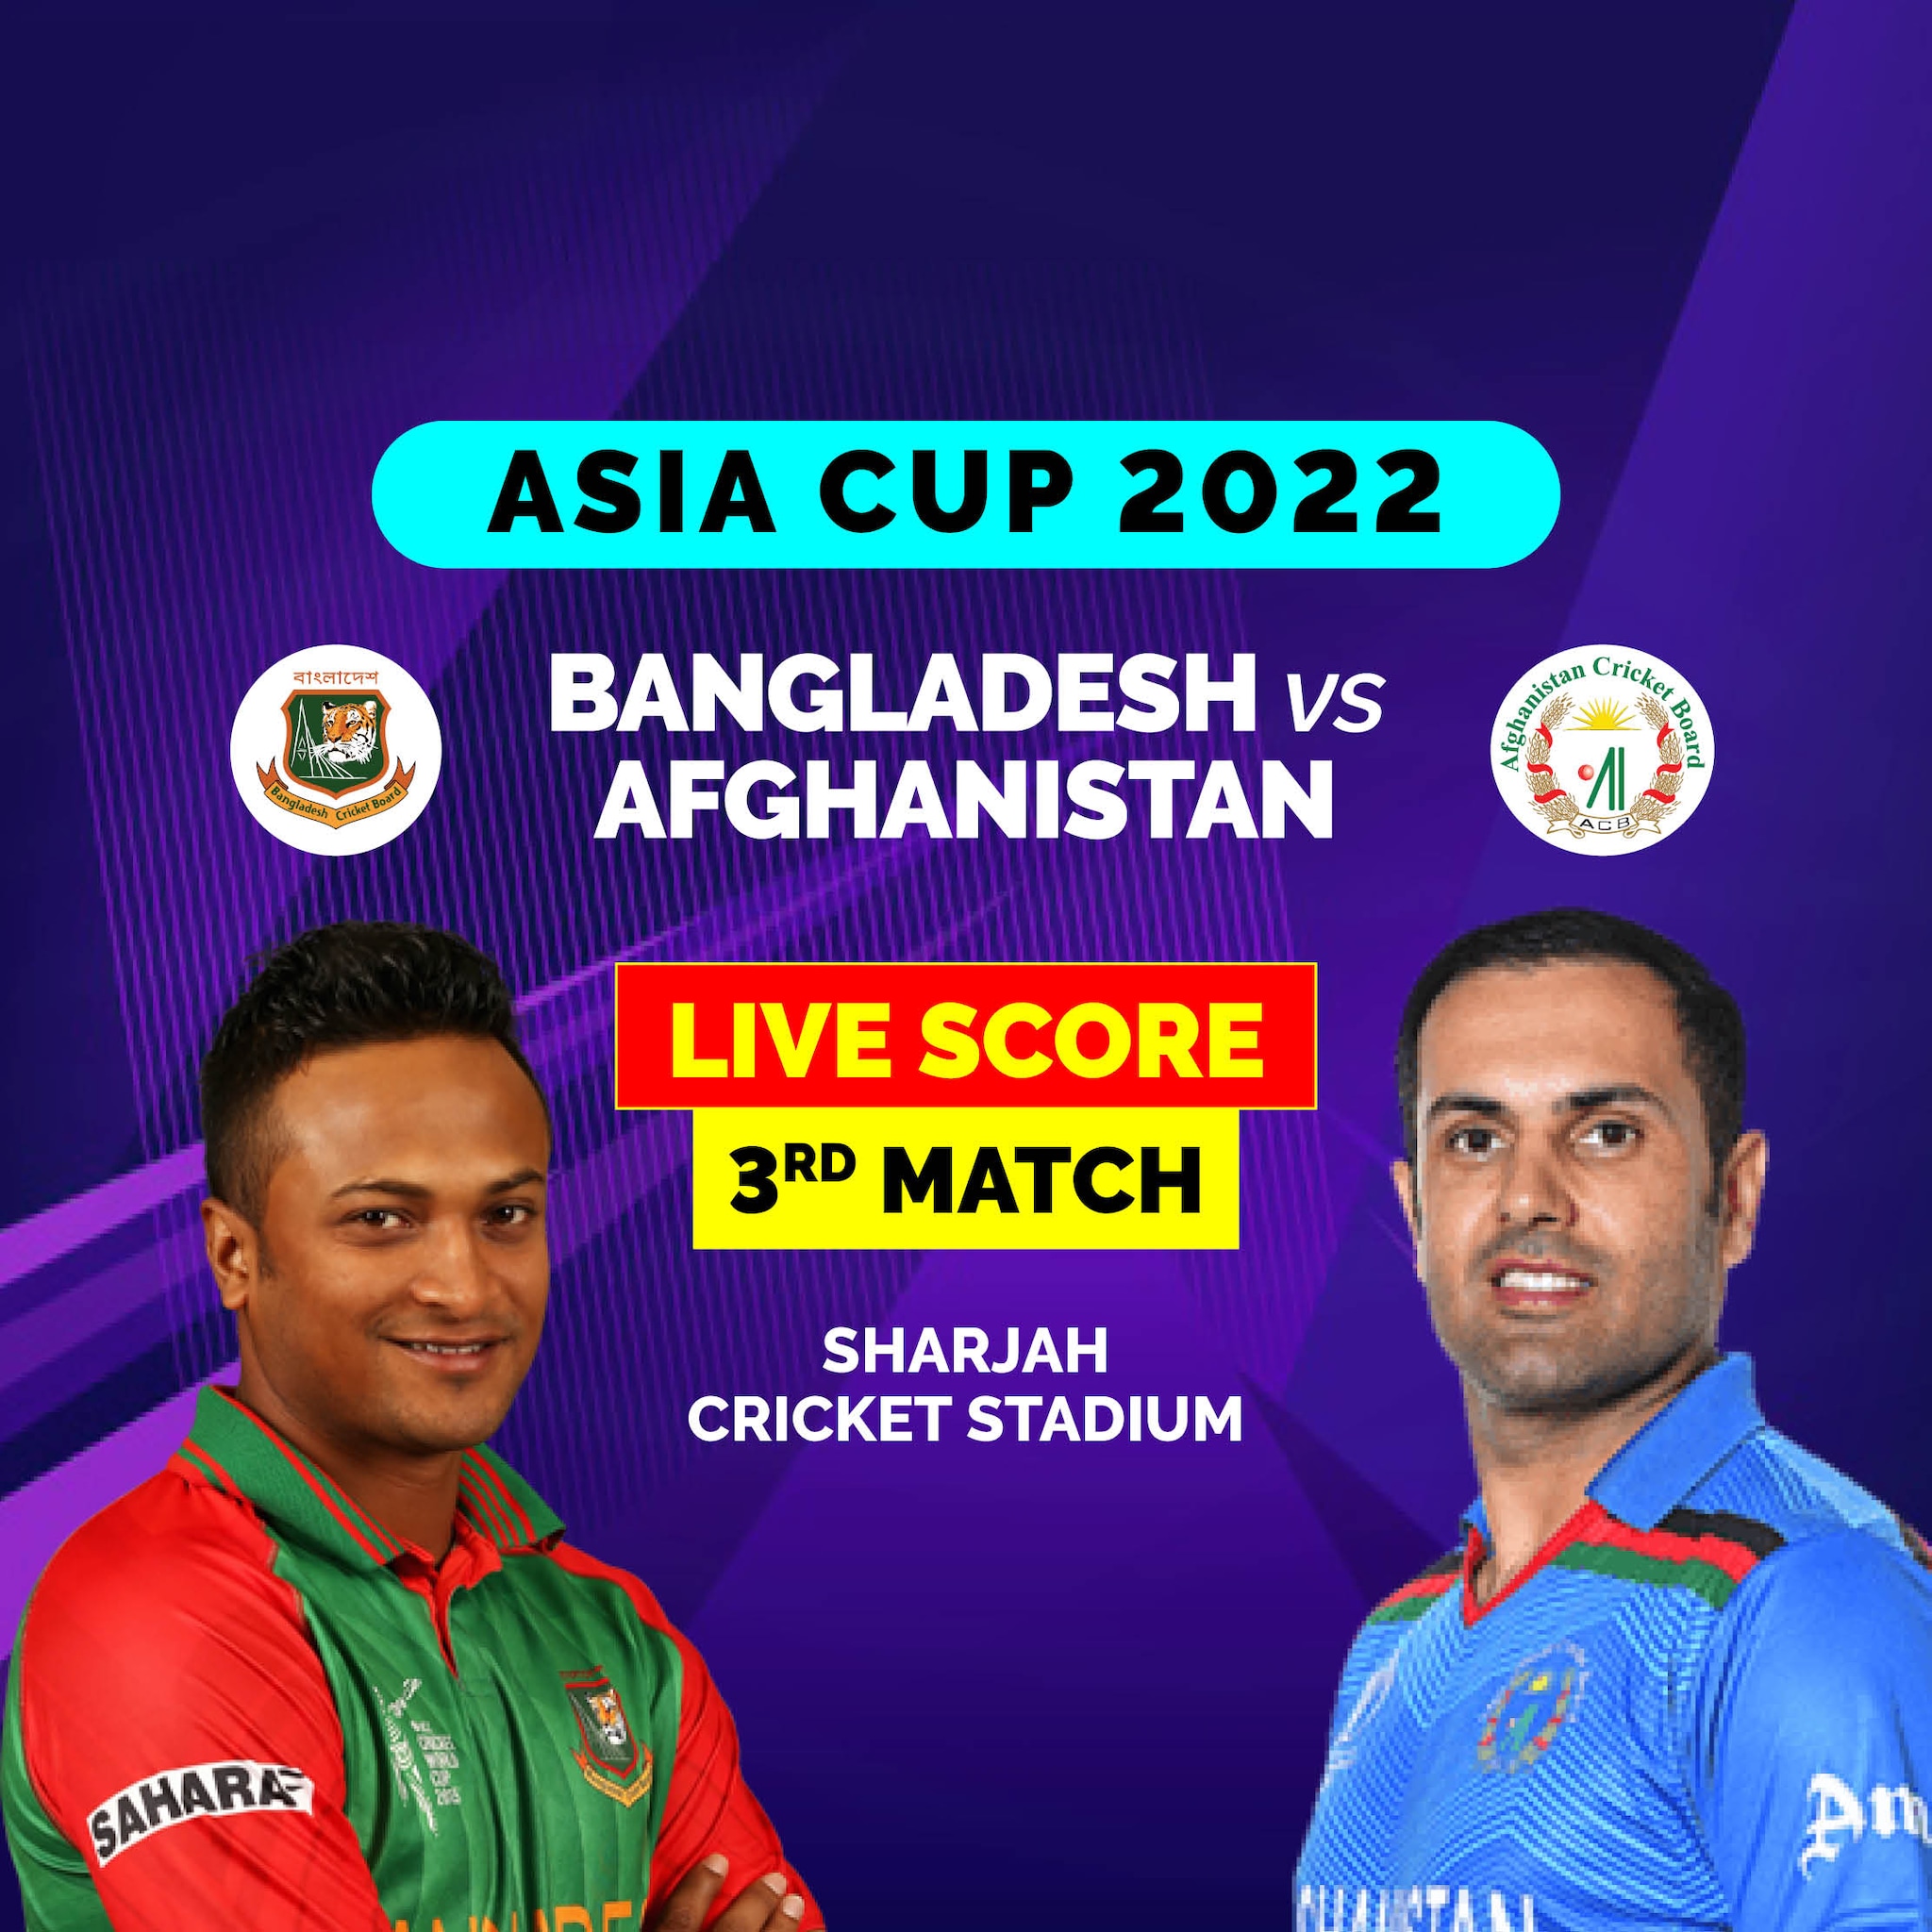 BAN vs AFG Highlights, Asia Cup 2022 - Afghanistan 131/3 vs Bangladesh 127/7; Become First Team to Enter Super Four Stage